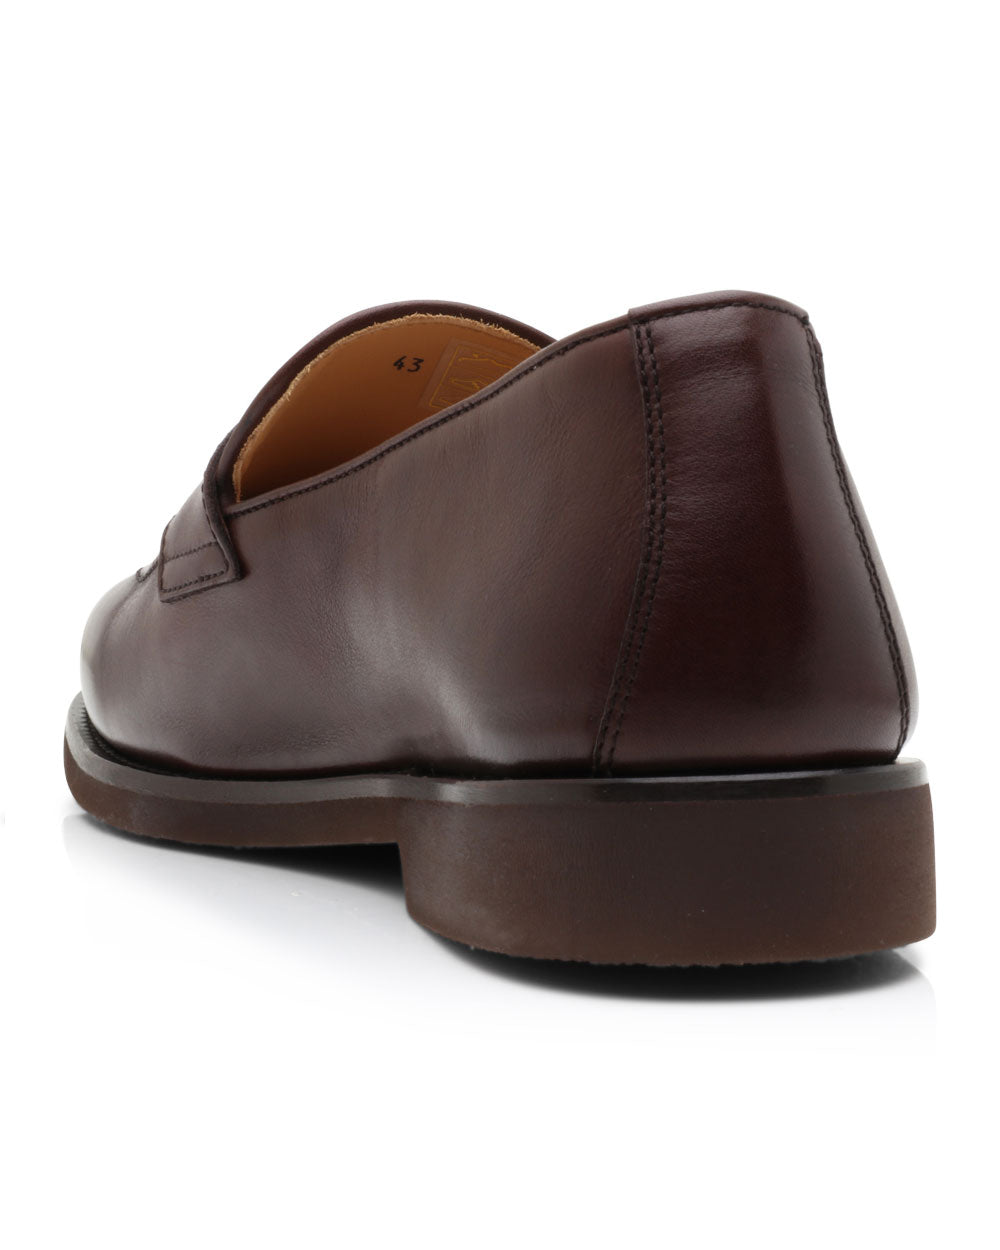 Buffed Calfskin Penny Loafer in Brown